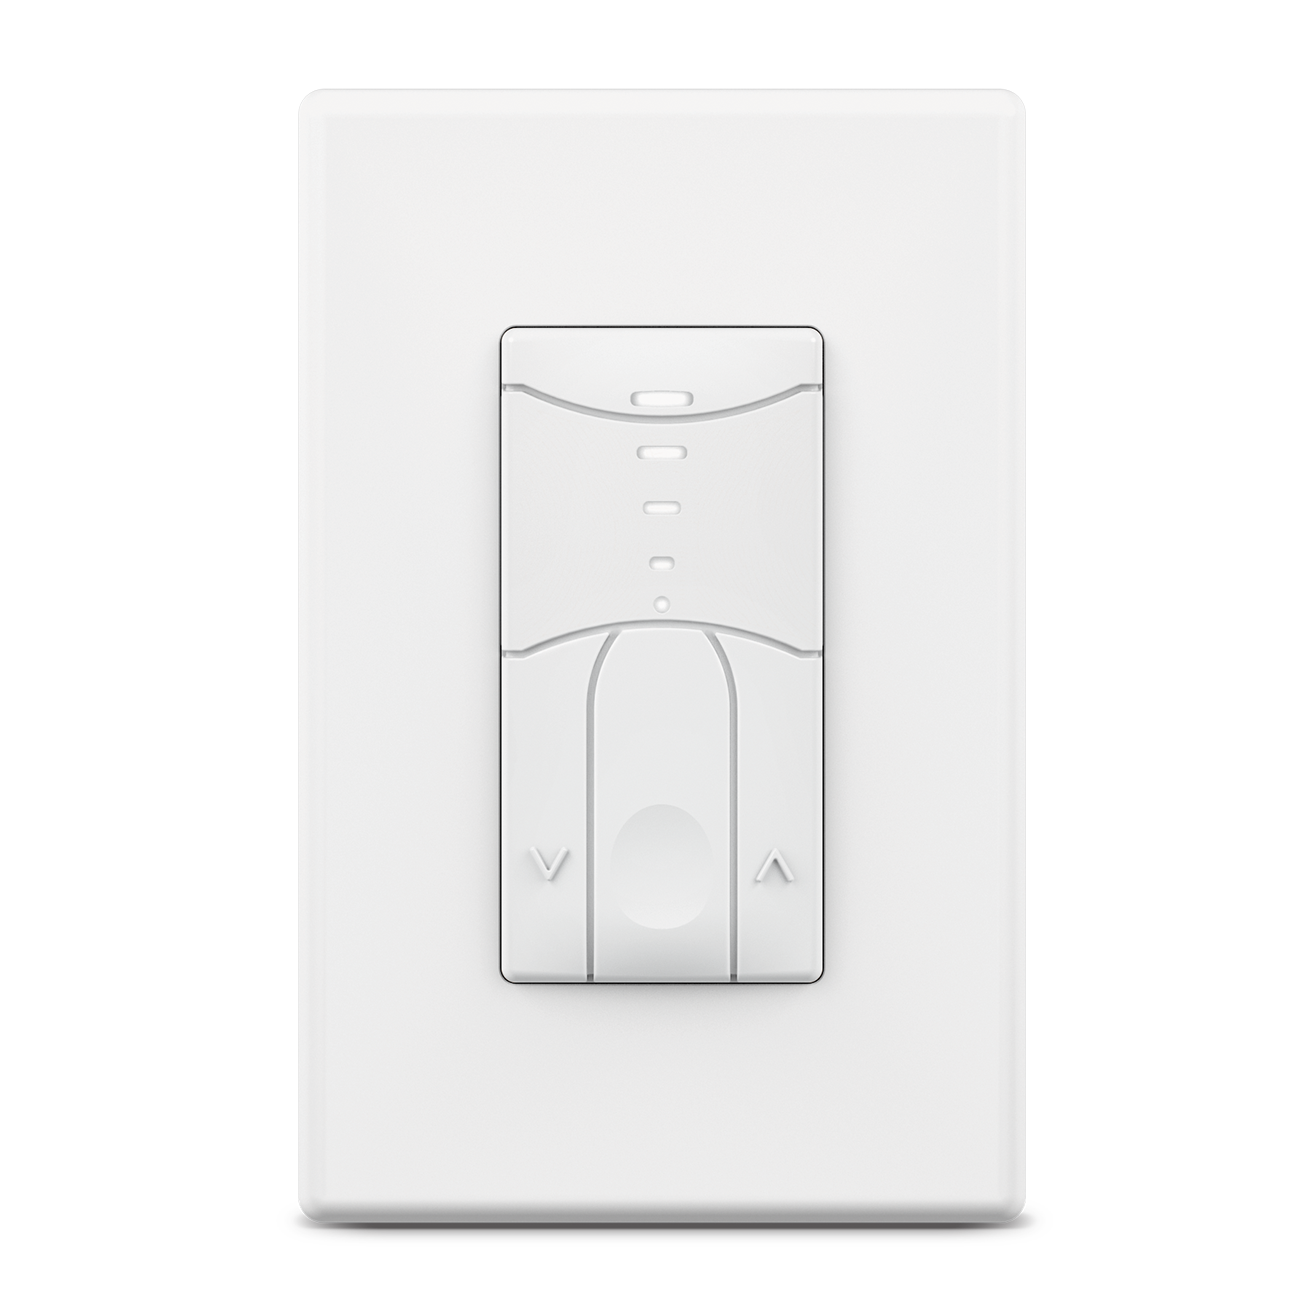 PS-SWX-823 Line Voltage Dimmer Switch